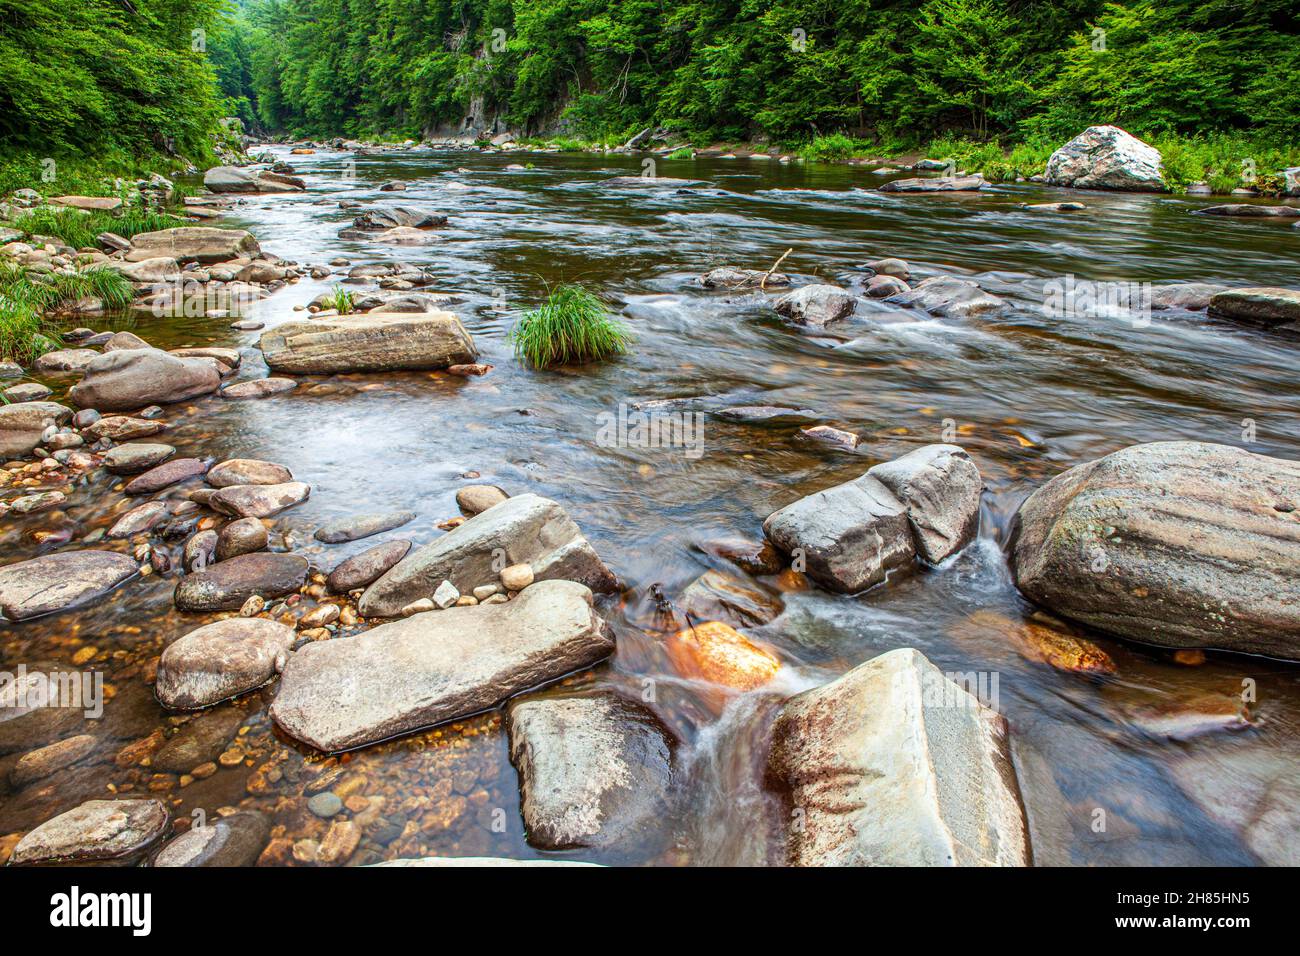 The Westfield River running through the Chesterfield Gorge in Chesterfield, Massachusetts Stock Photo